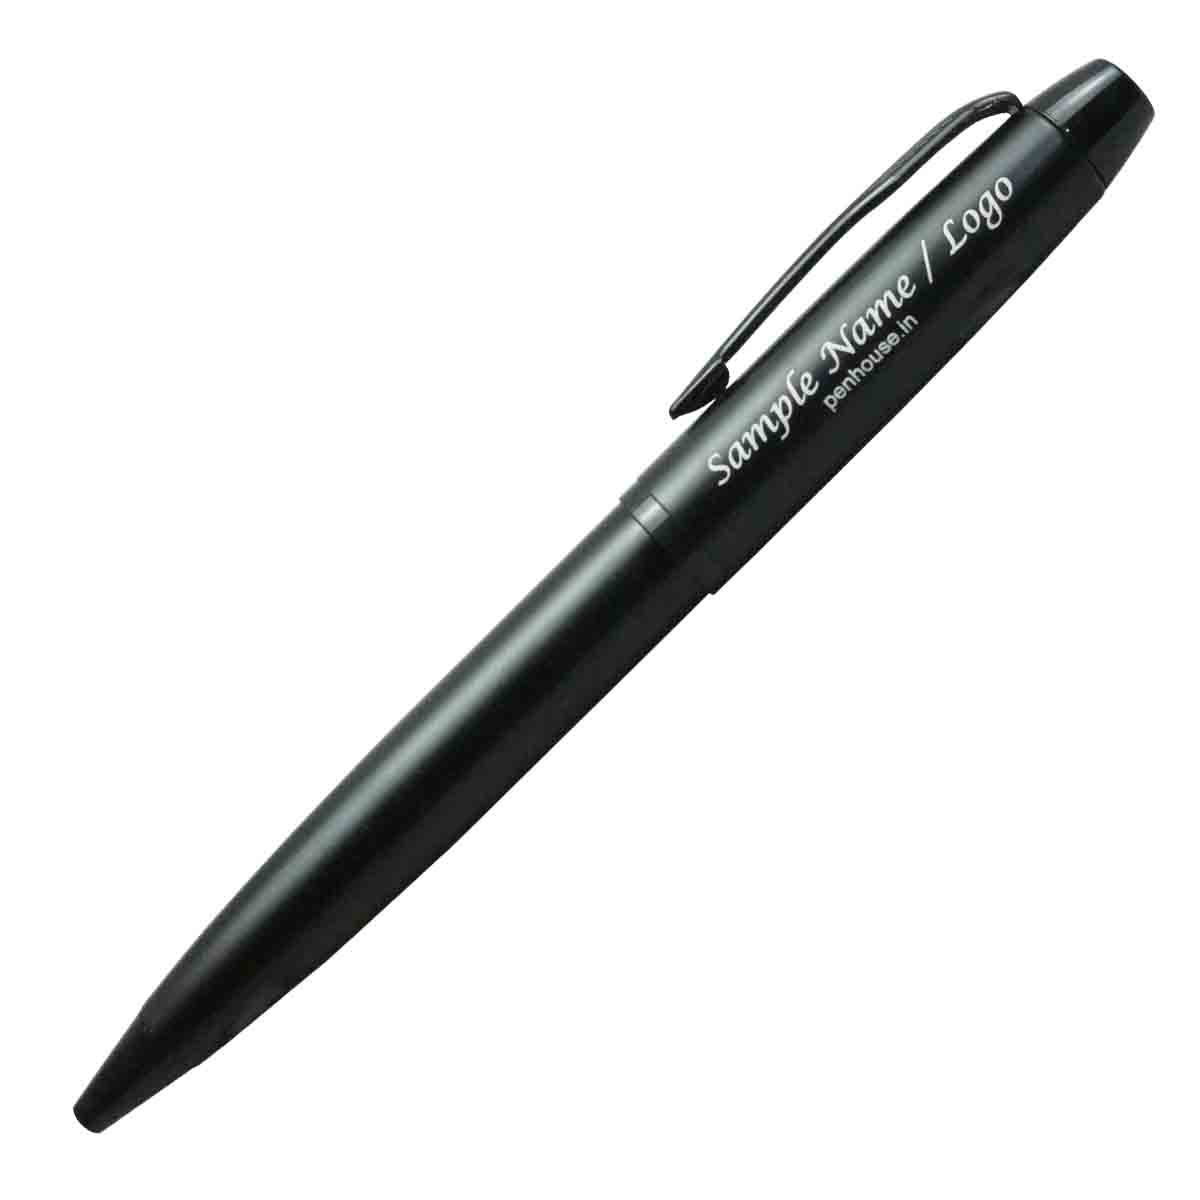 penhouse.in M11BG Black Color Body and Cap Twist Ball Pen with personalized name SKU 19468